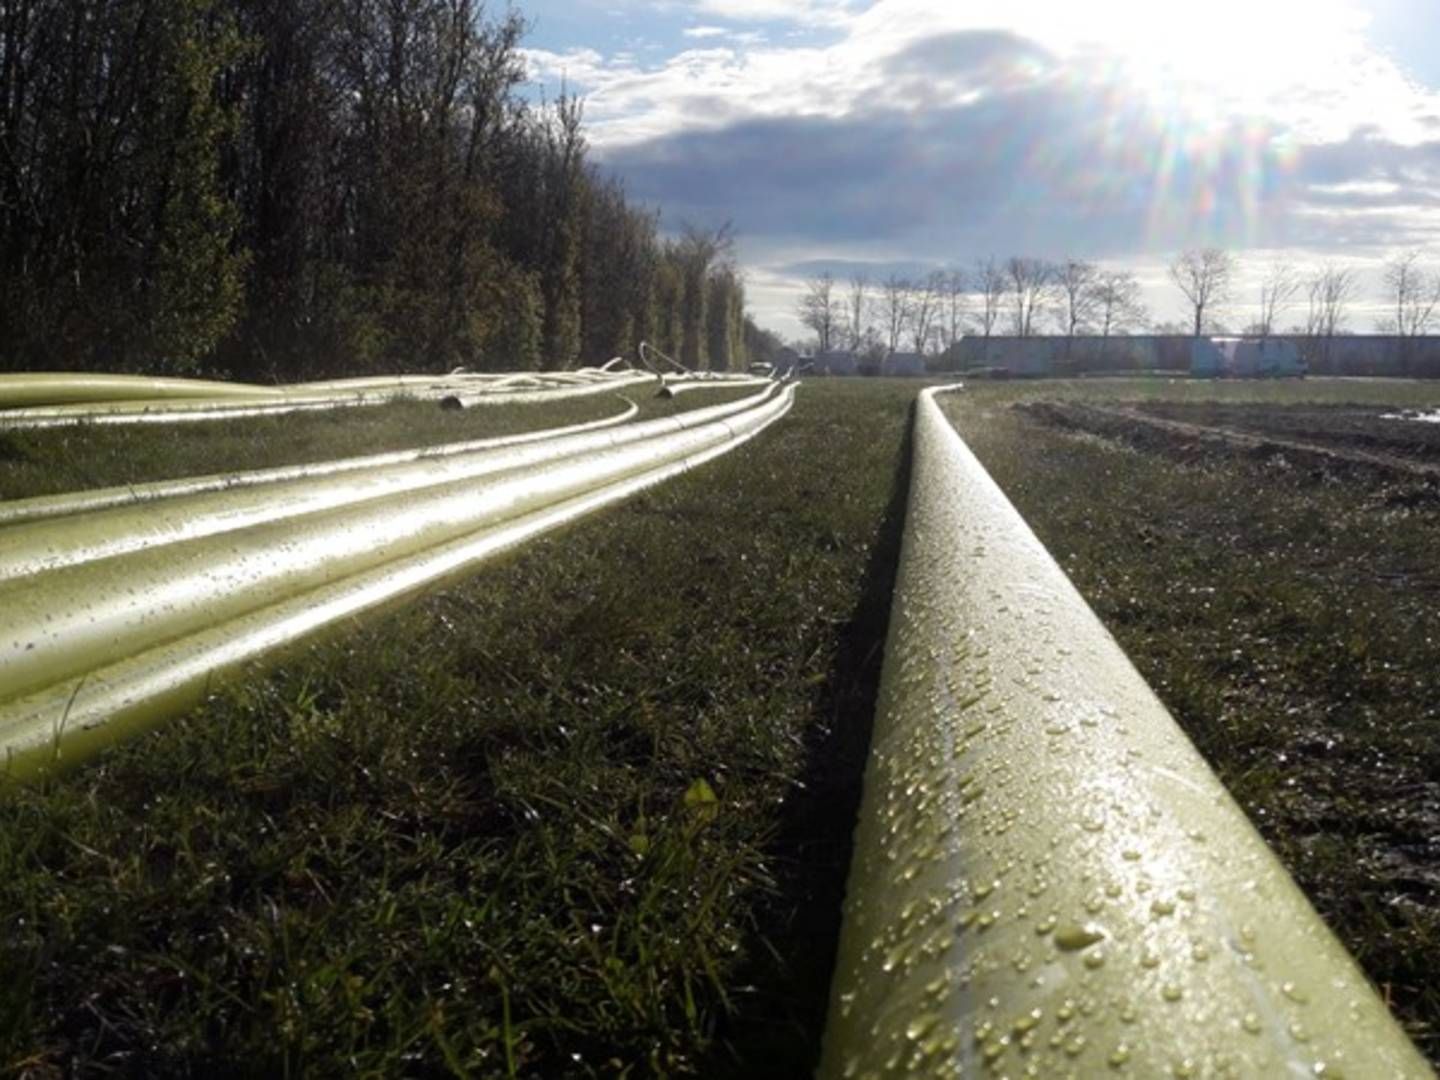 With relatively simple modications, hydrogen can be transported in pipelines used for natural gas. | Photo: Evida